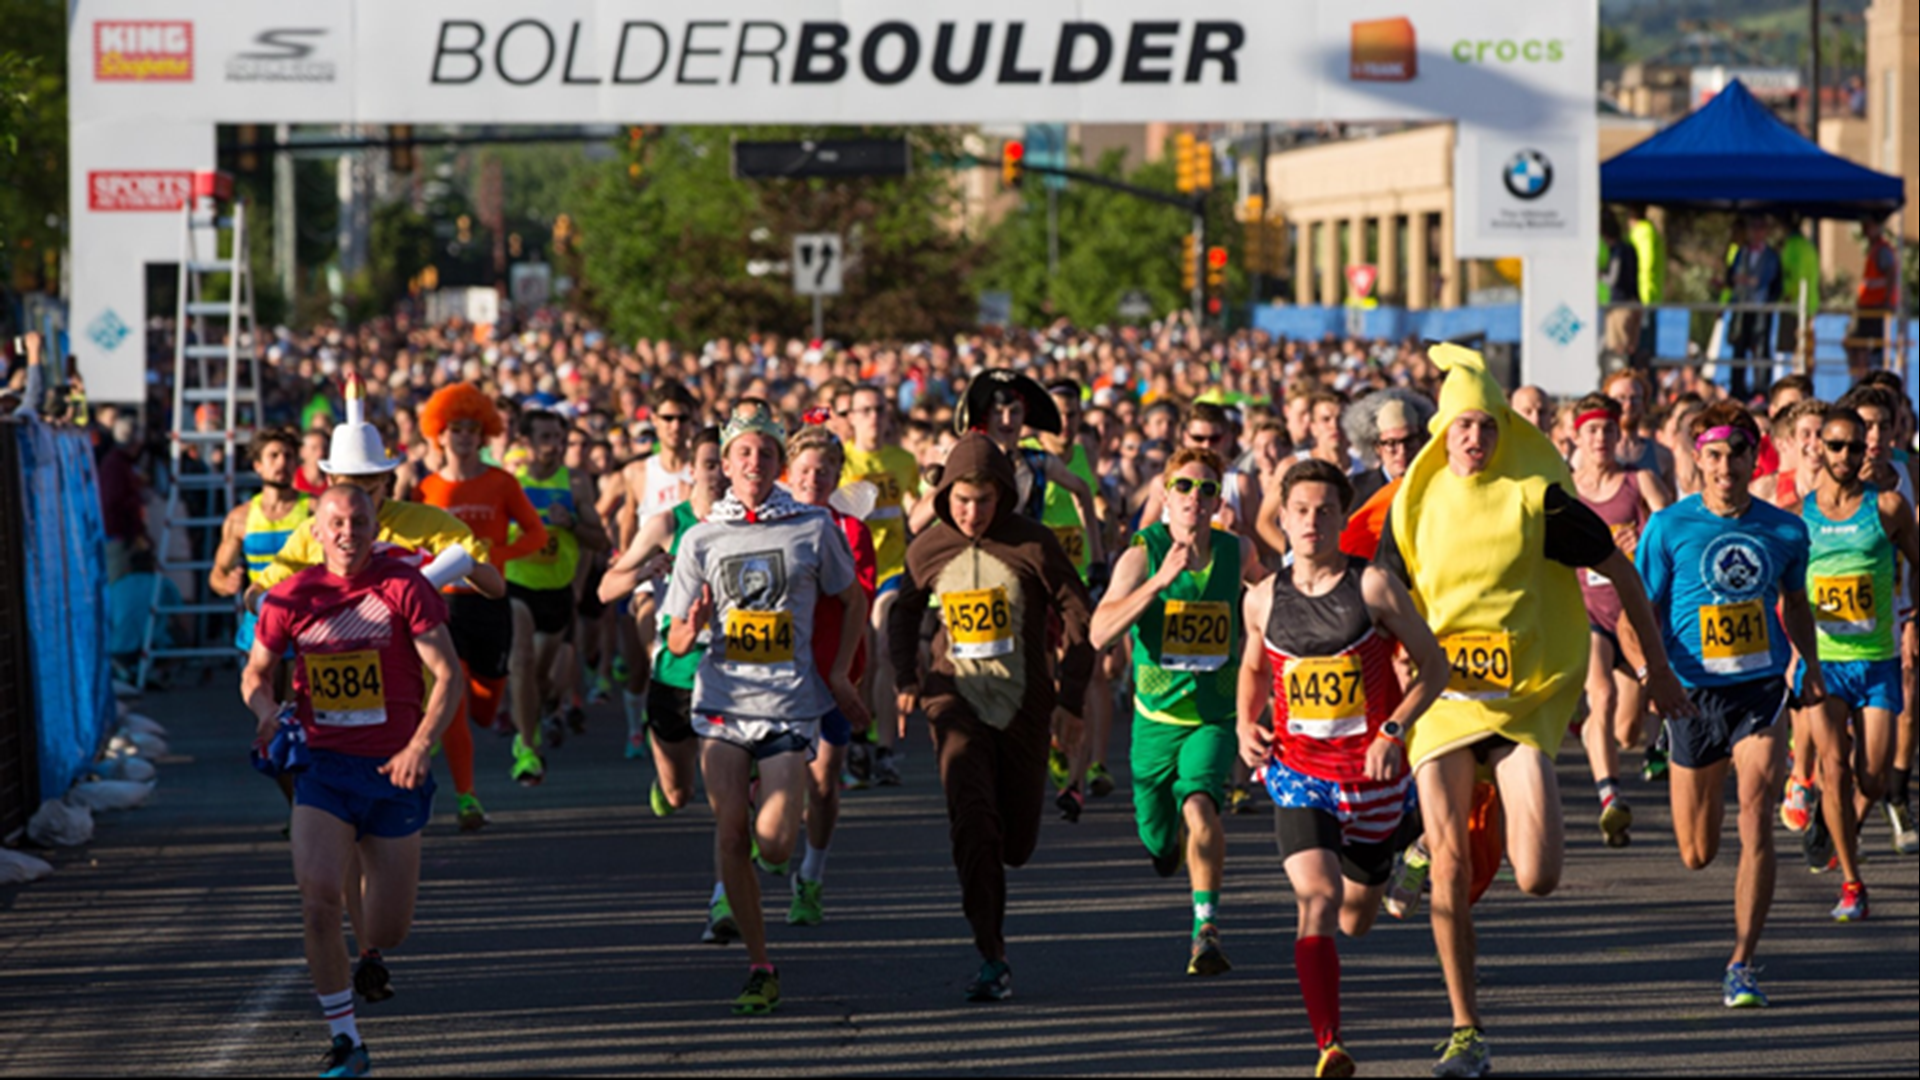 For 41 years, the Bolder Boulder has been a Memorial Day tradition in Colorado.